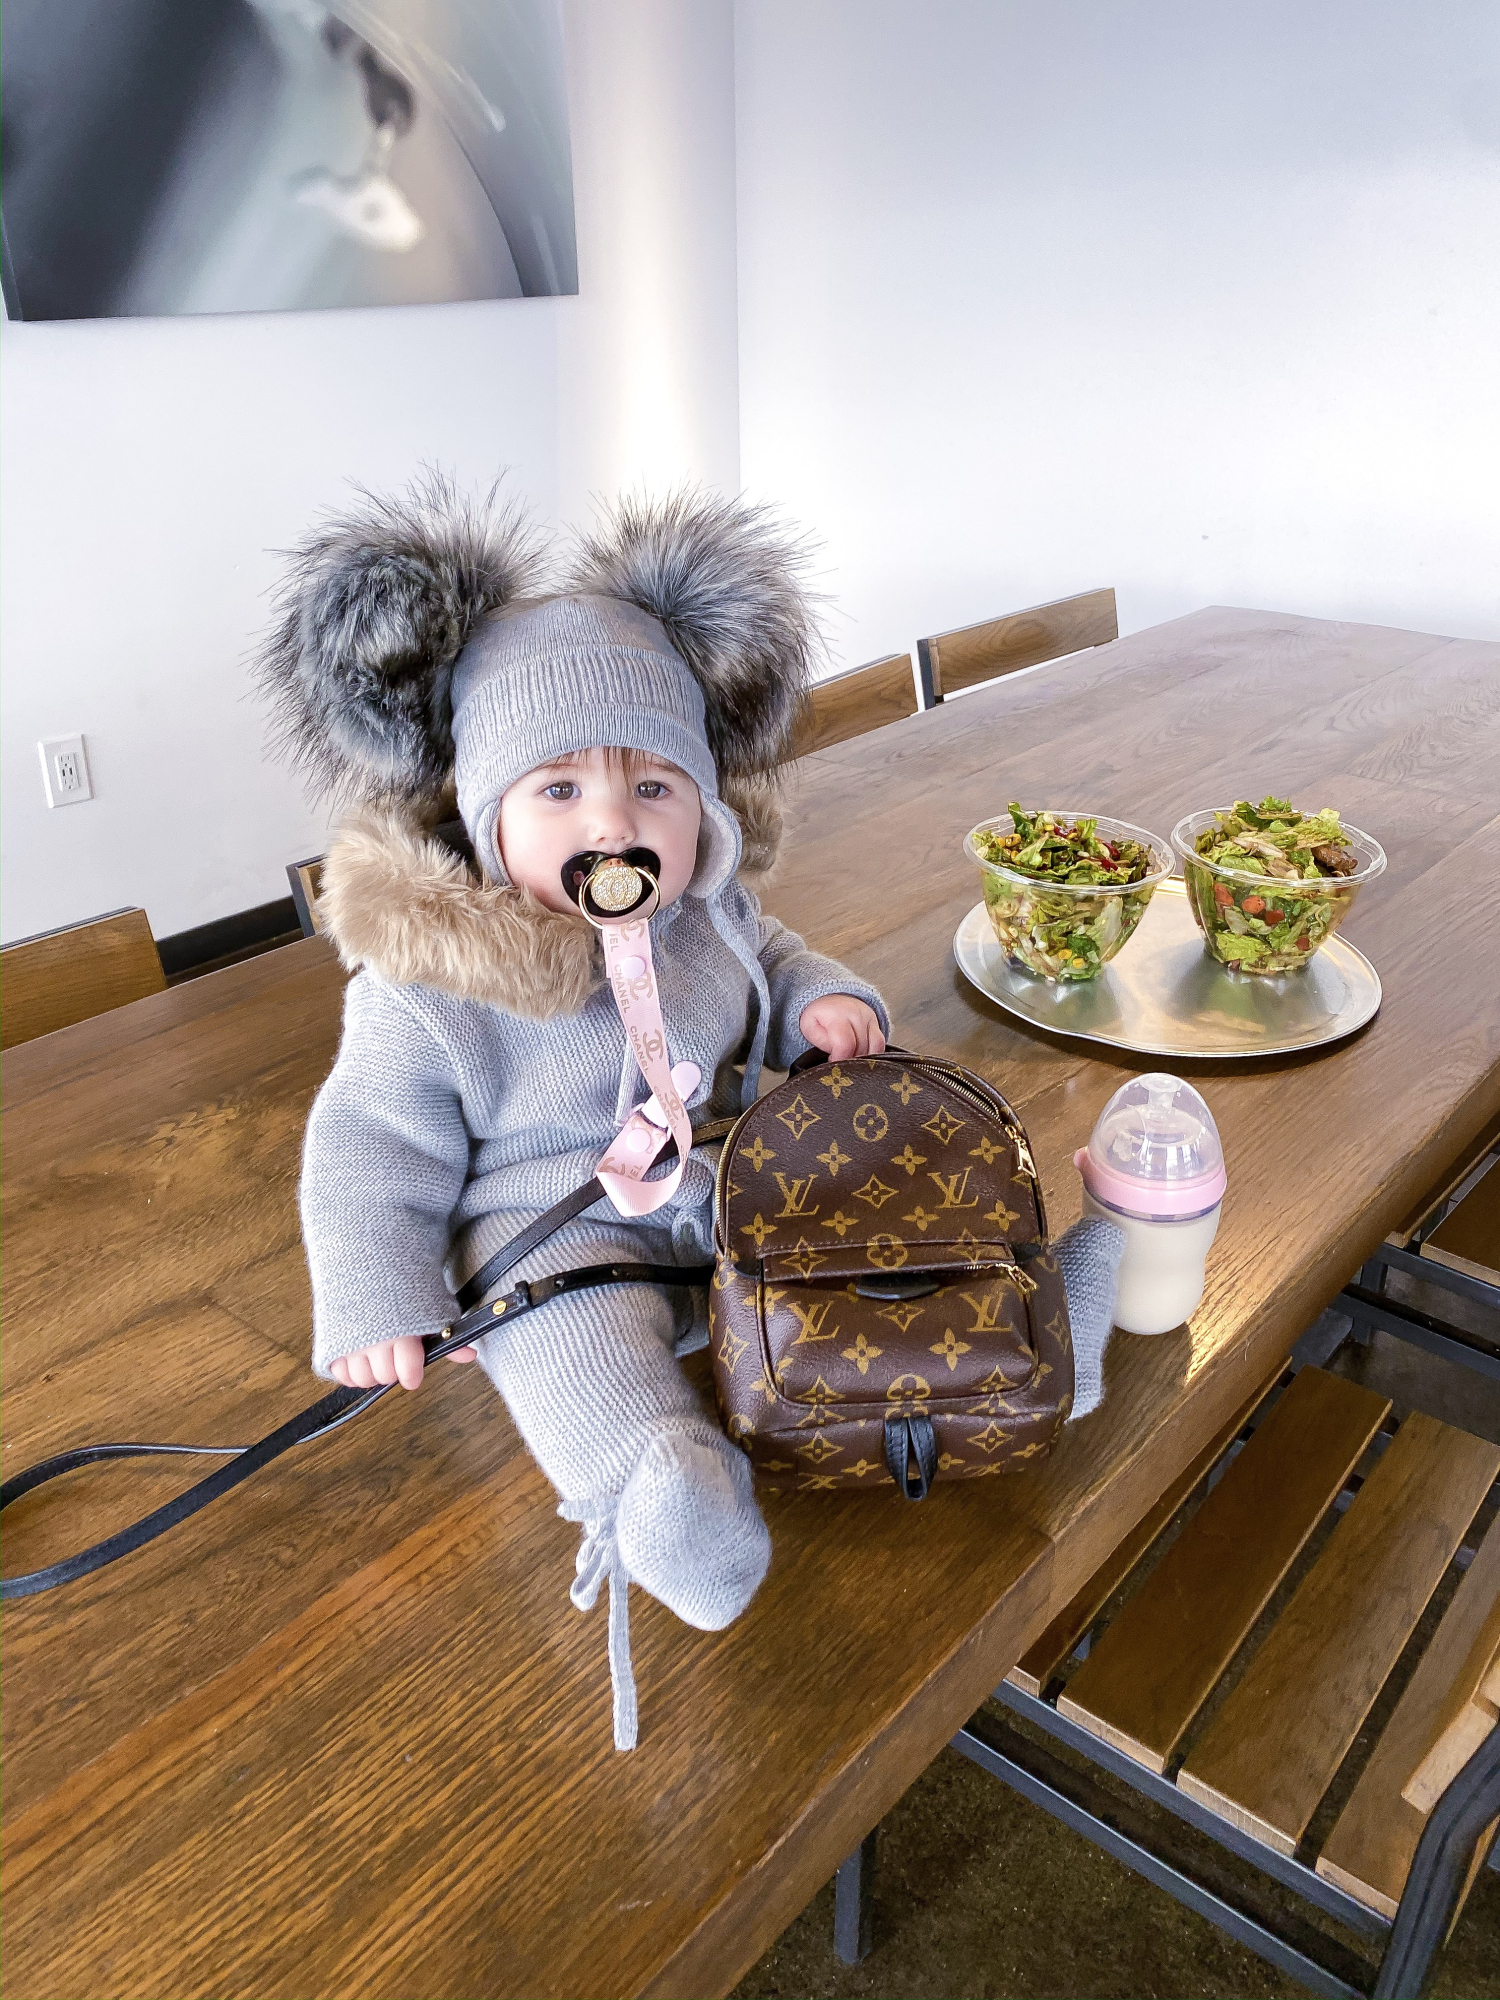 baby girl fashion pinterest, louis vuitton palm springs backpack | A YEAR IN REVIEW : MASSIVE 2019 INSTAGRAM RECAP by popular Oklahoma life and style blog, The Sweetest Thing: image of a baby sitting on a table next to some salad bowls and wearing a grey double pom-pom hat and holding a Louis Vuitton mini backpack. 